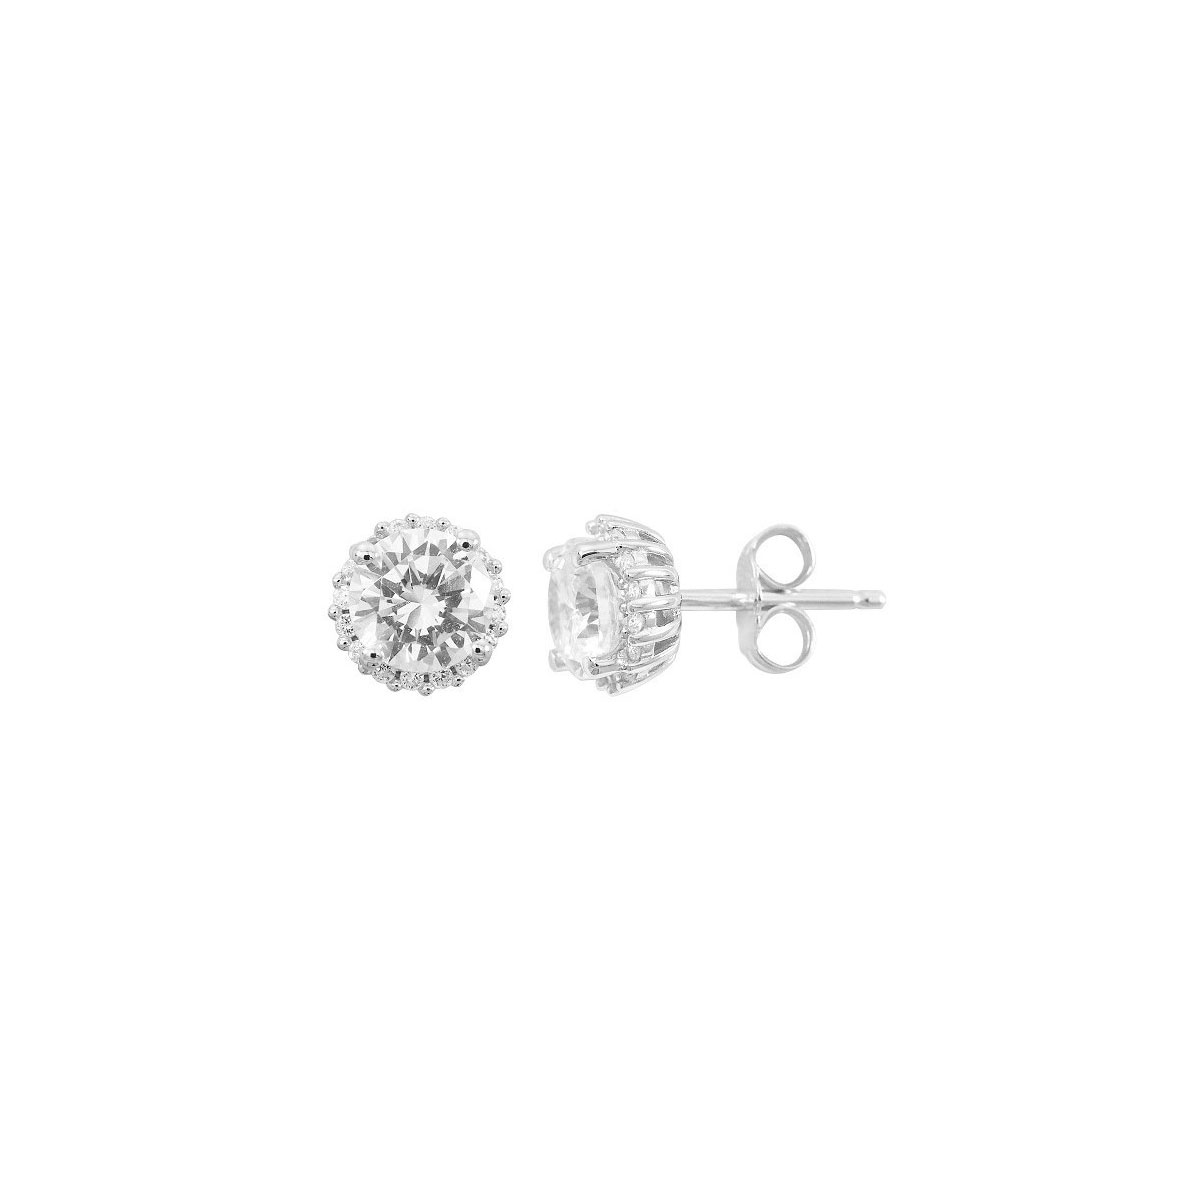 Waterford Jewelry Sterling Silver Stone Set Medium Round Cluster Stud Earrings